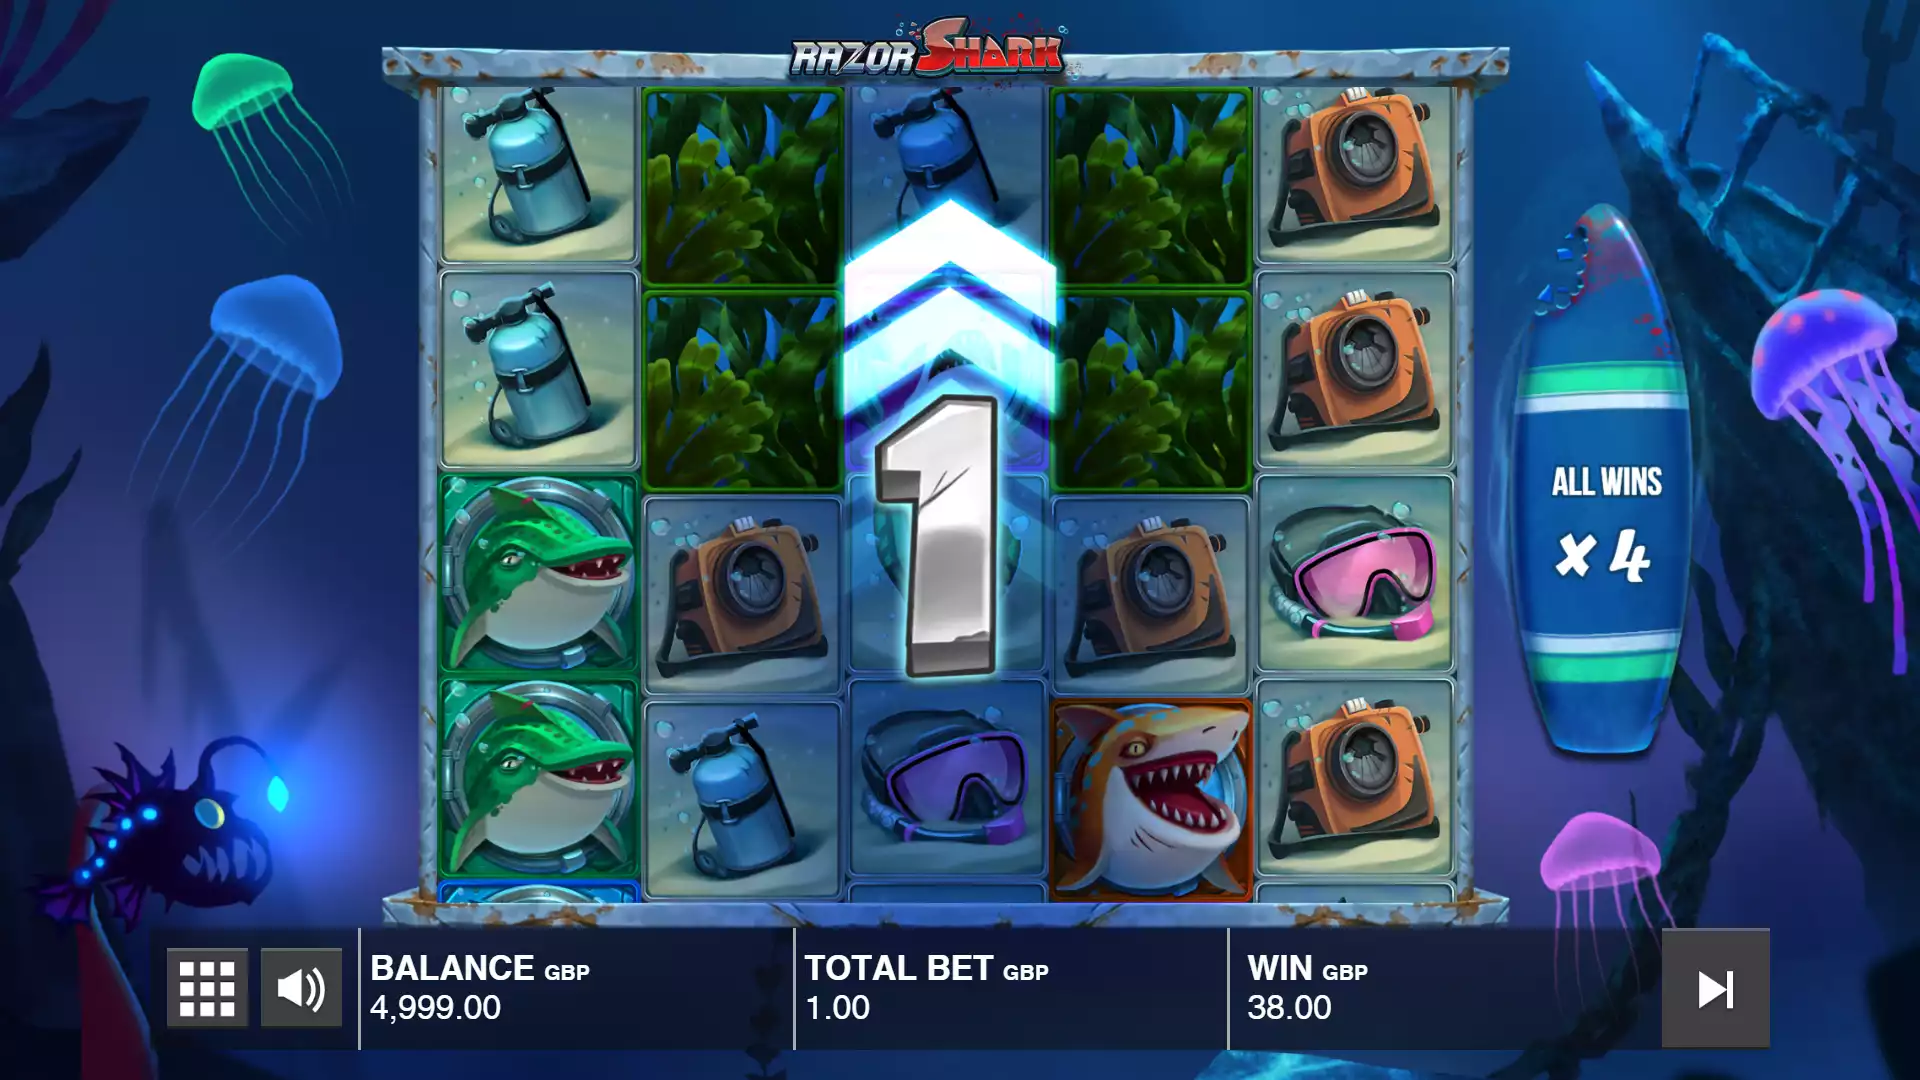 Razor Shark Slot - Nudge and Reveal Feature